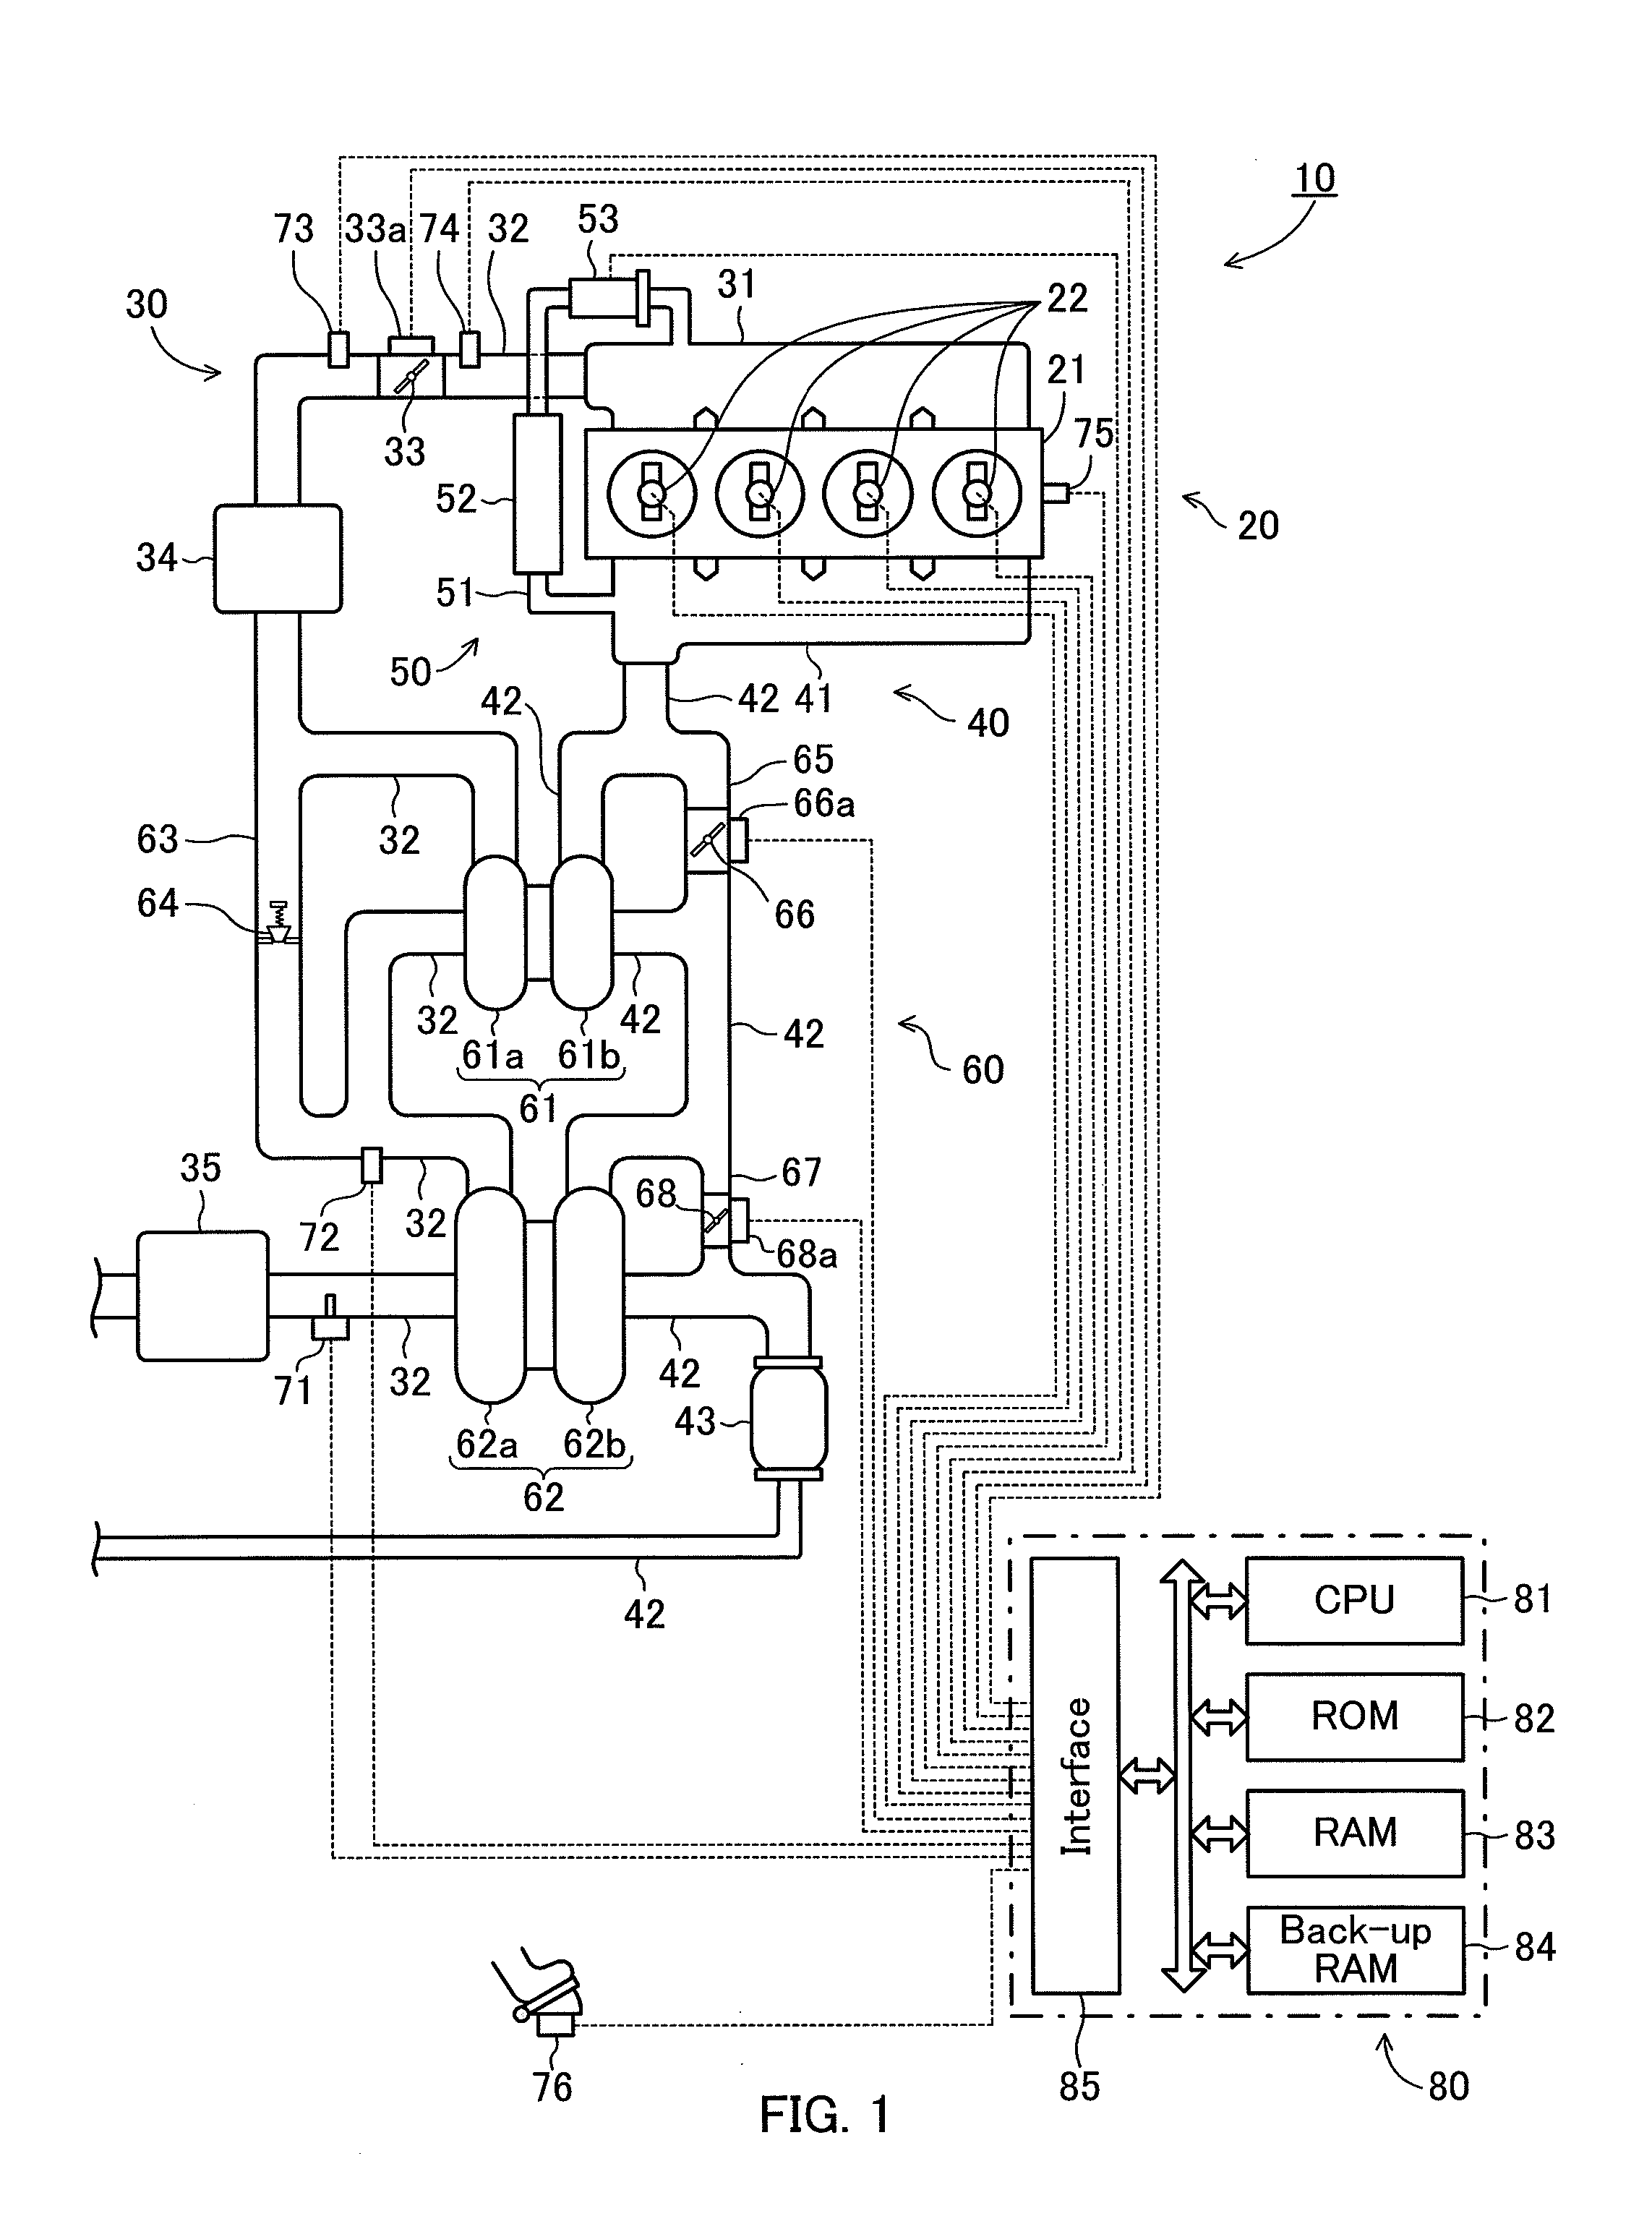 Apparatus for determining an abnormality of a control valve of an internal combustion engine